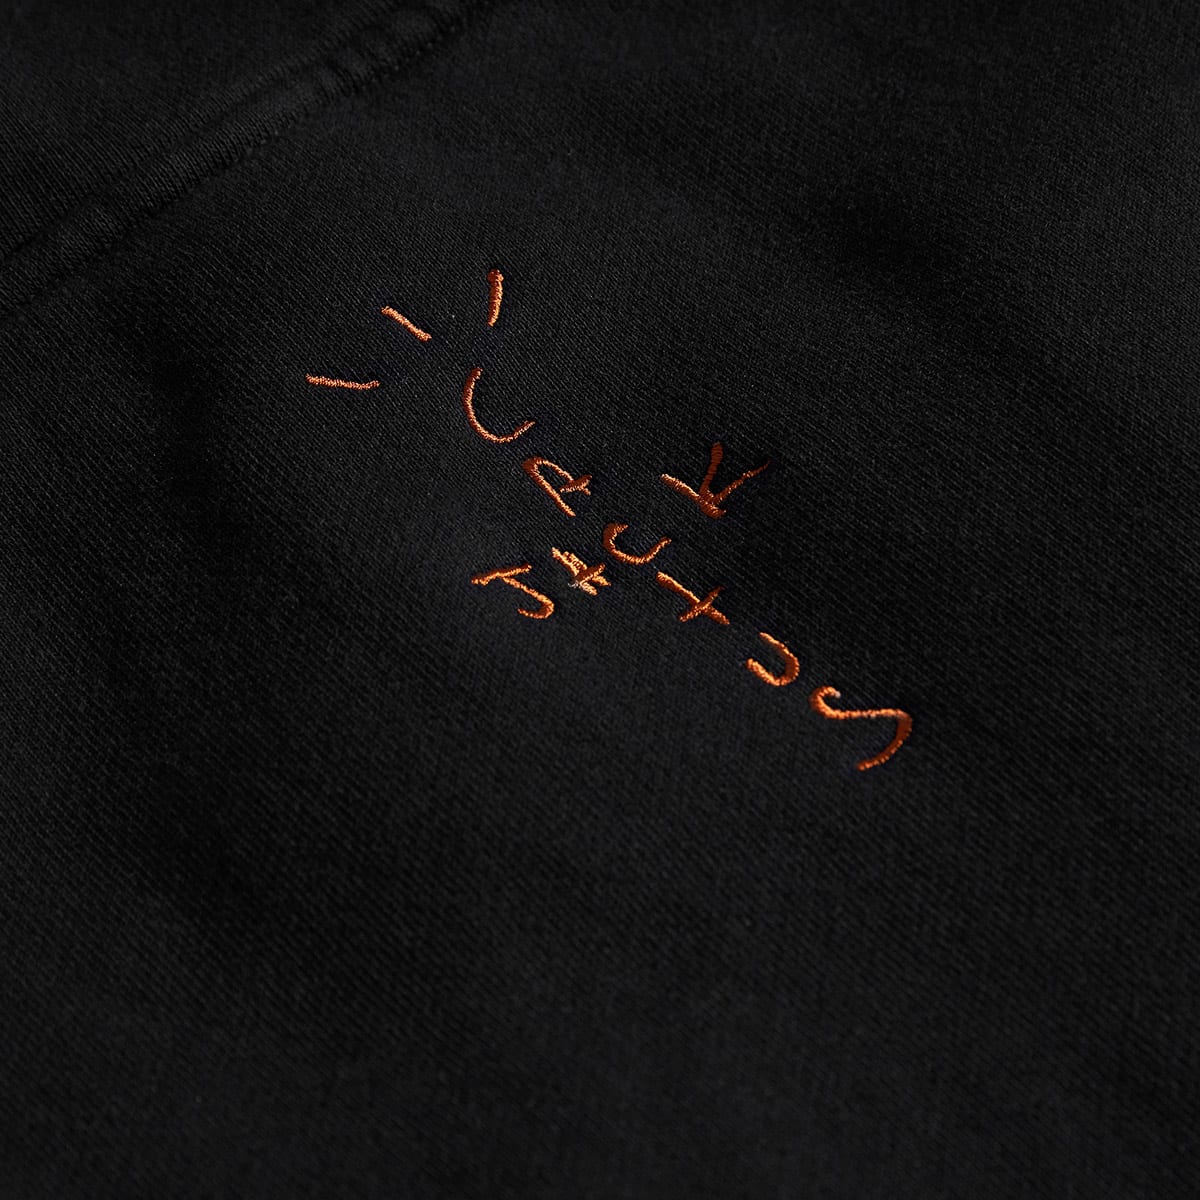 Nike x Cactus Jack Utility Hoody (Black) | END. Launches